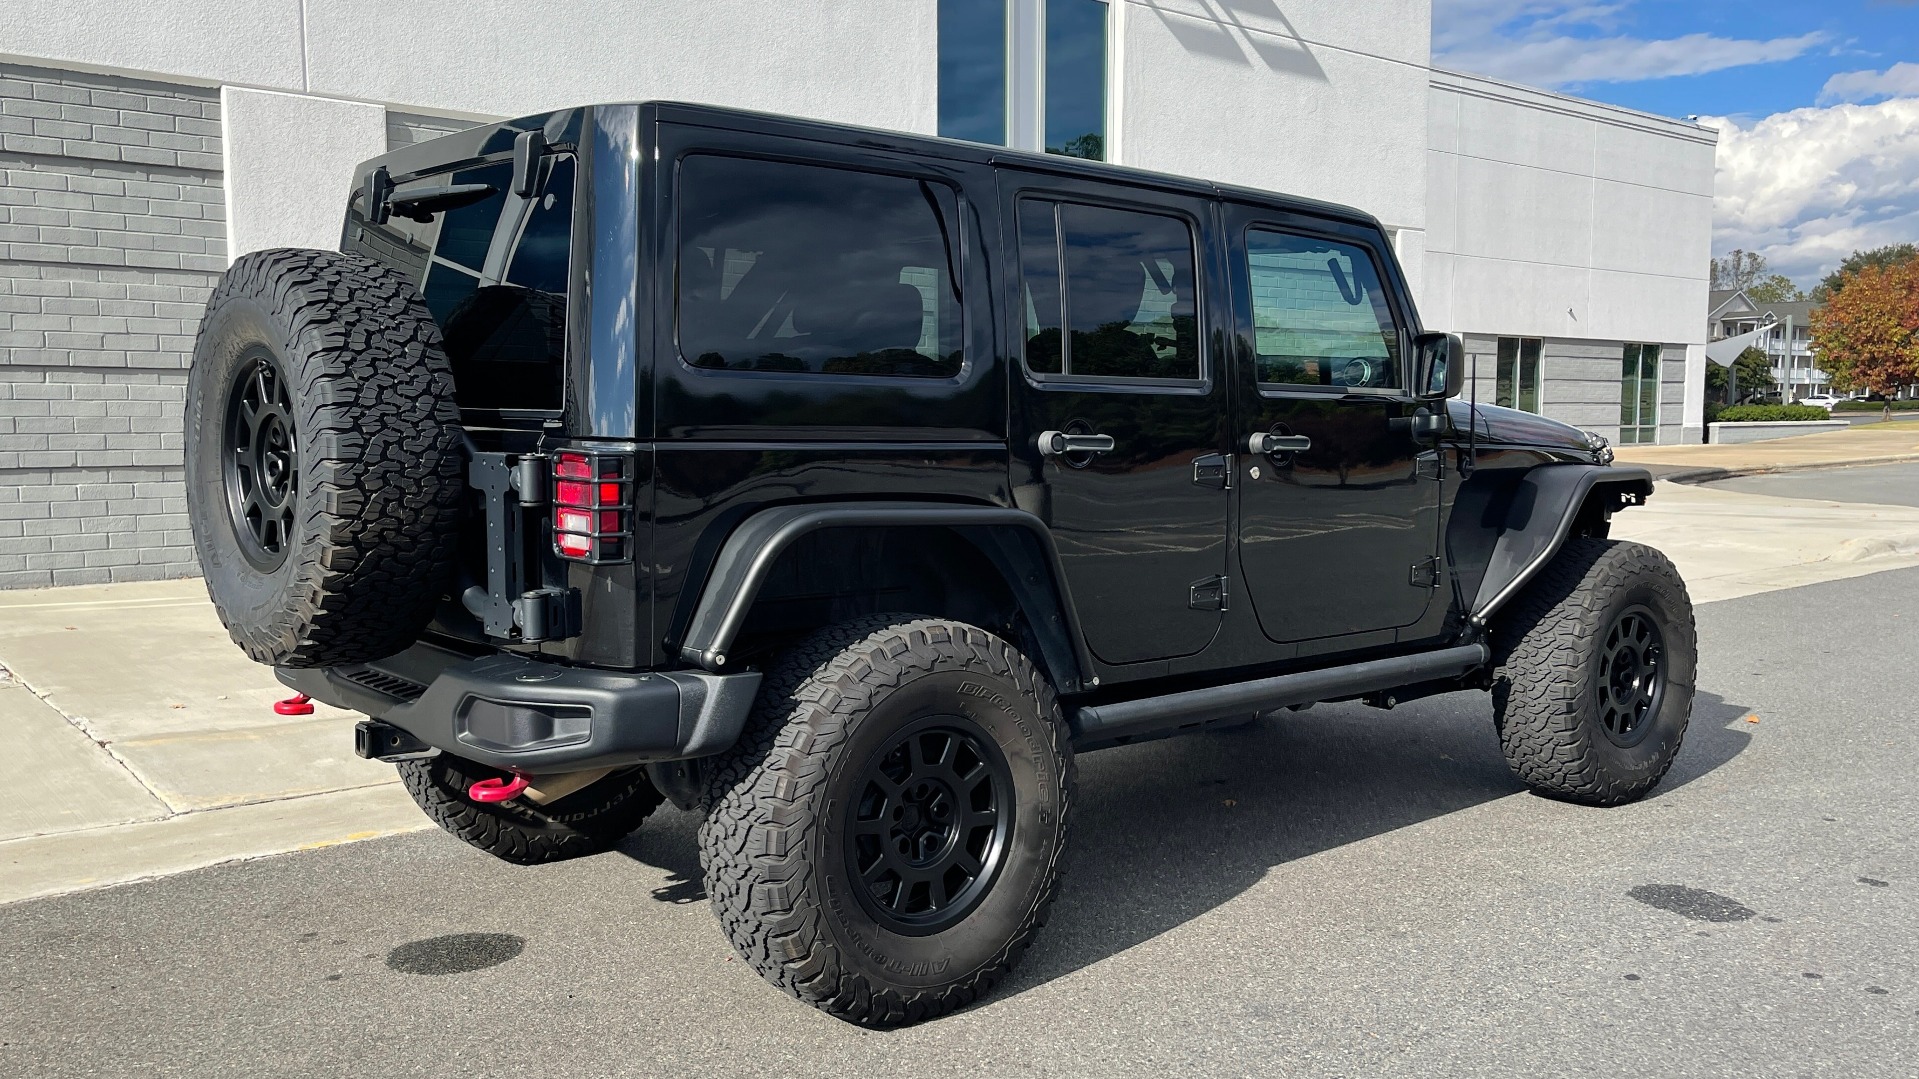 Used 2015 Jeep WRANGLER UNLIMITED RUBICON HARD ROCK 4X4 / 3.6L / 5-SPD AUTO / FREEDOM TOP for sale Sold at Formula Imports in Charlotte NC 28227 5